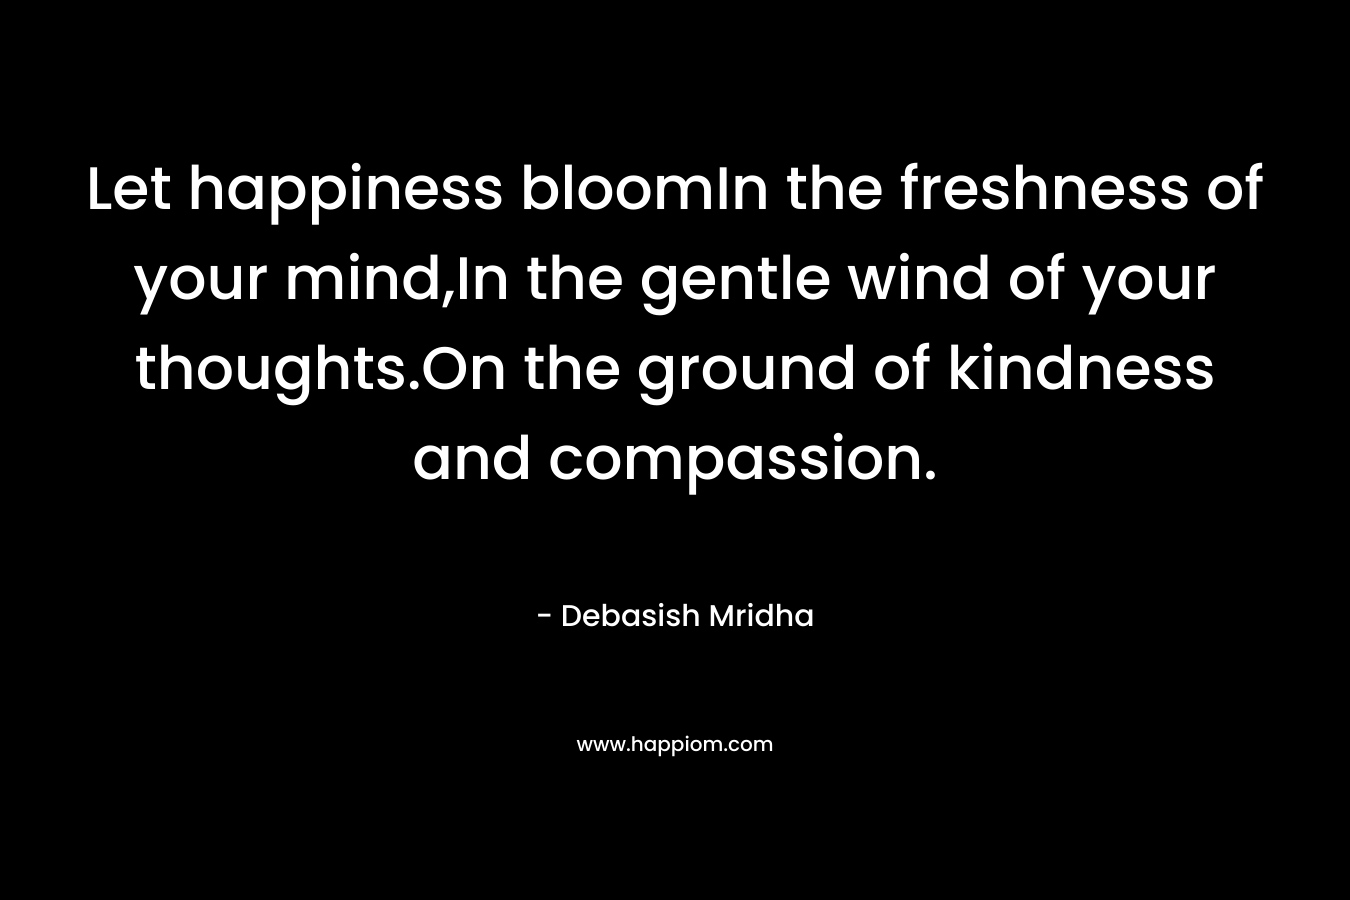 Let happiness bloomIn the freshness of your mind,In the gentle wind of your thoughts.On the ground of kindness and compassion.